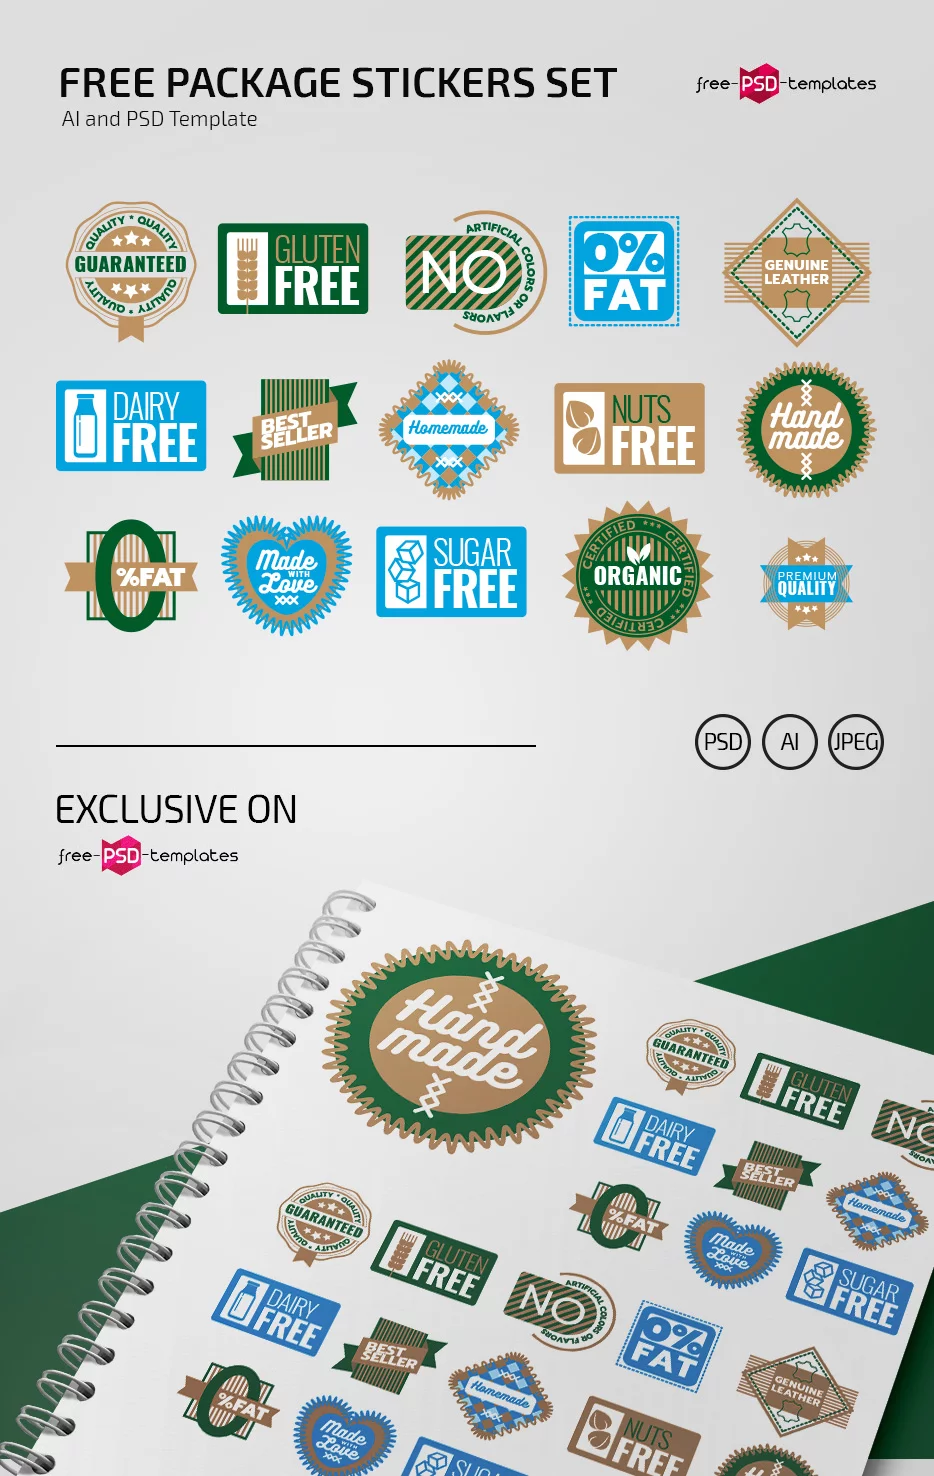 Free Package Stickers Set